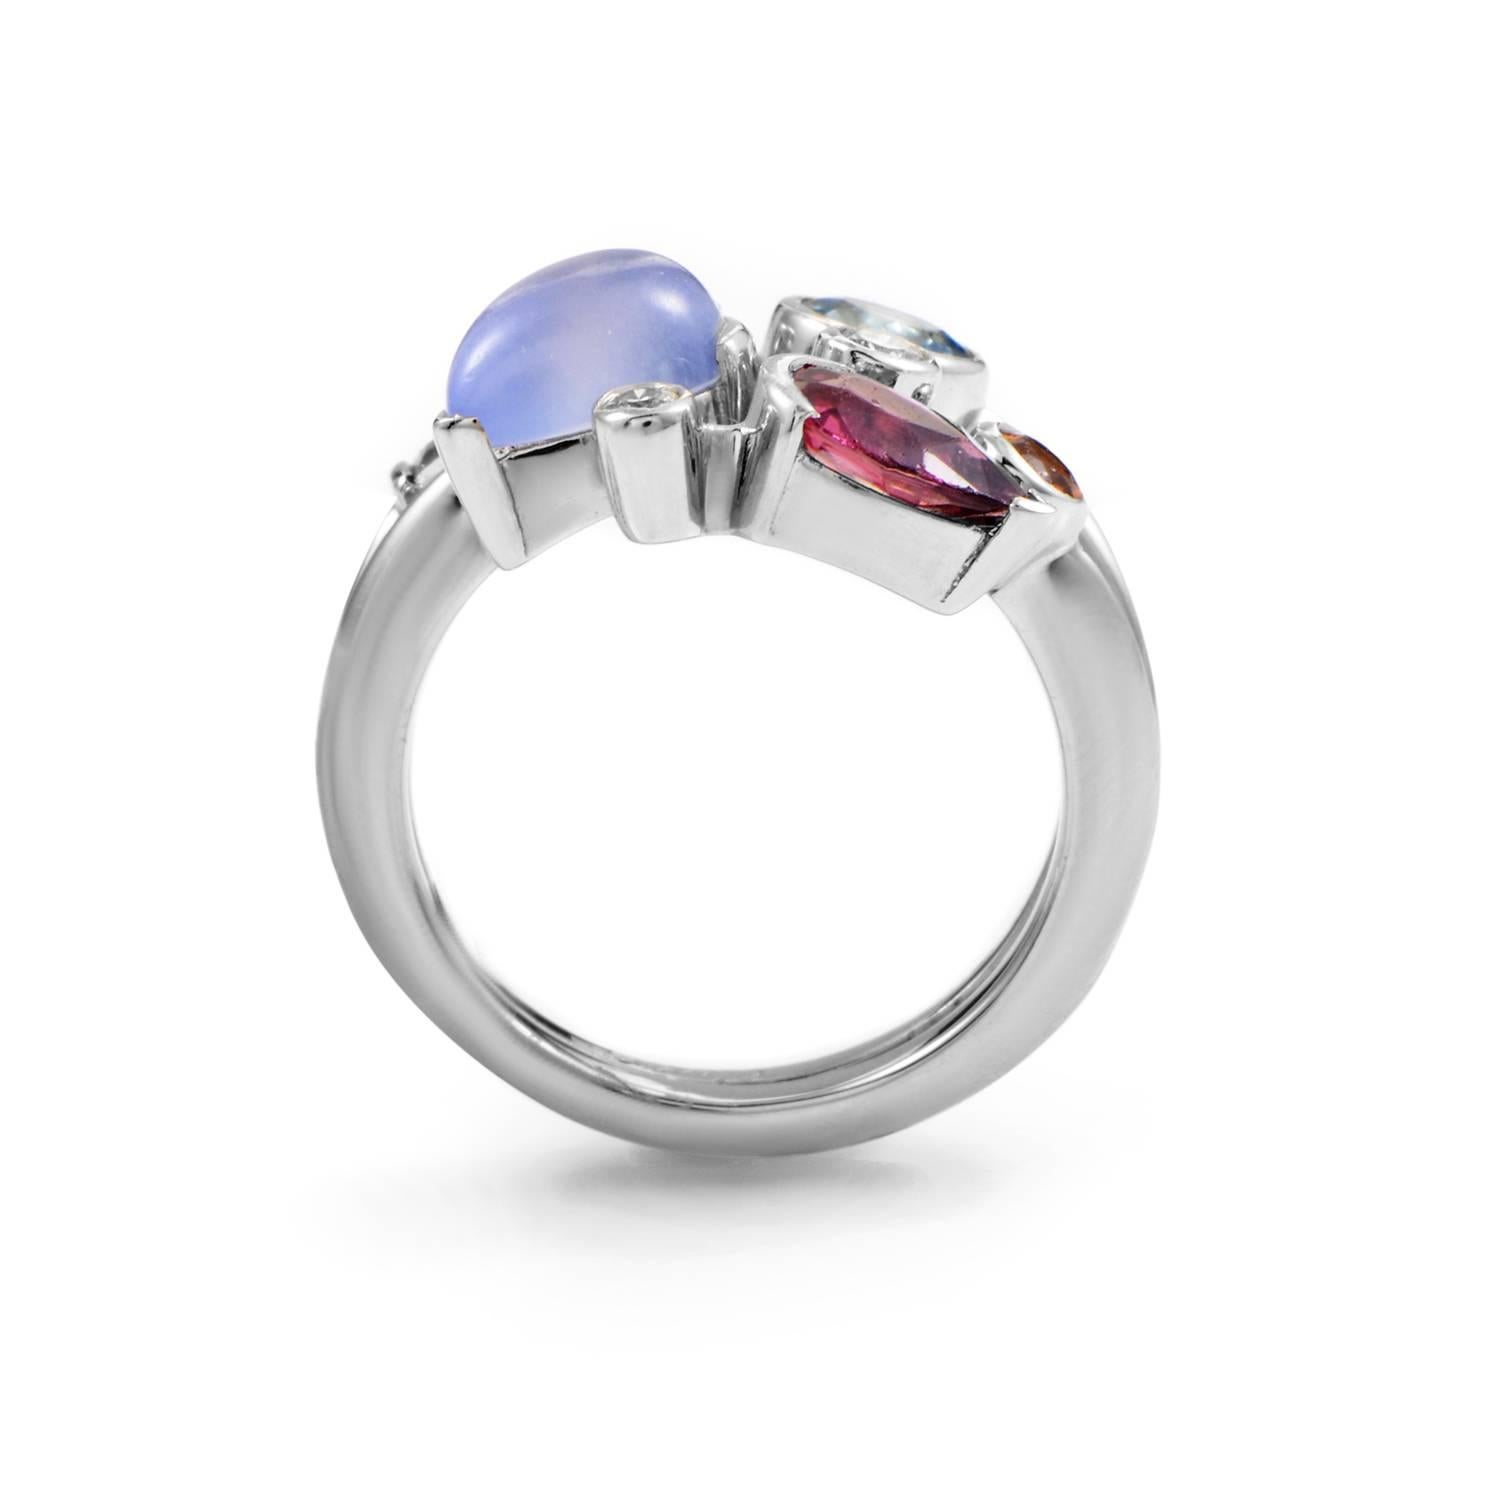 This ring design from Cartier is a veritable bouquet of luxury. Platinum provides the sturdy vine, curling with perfection into a forked band. From the rising band an abundance of precious stones blossom in sparkling abundance and myriad hues. This